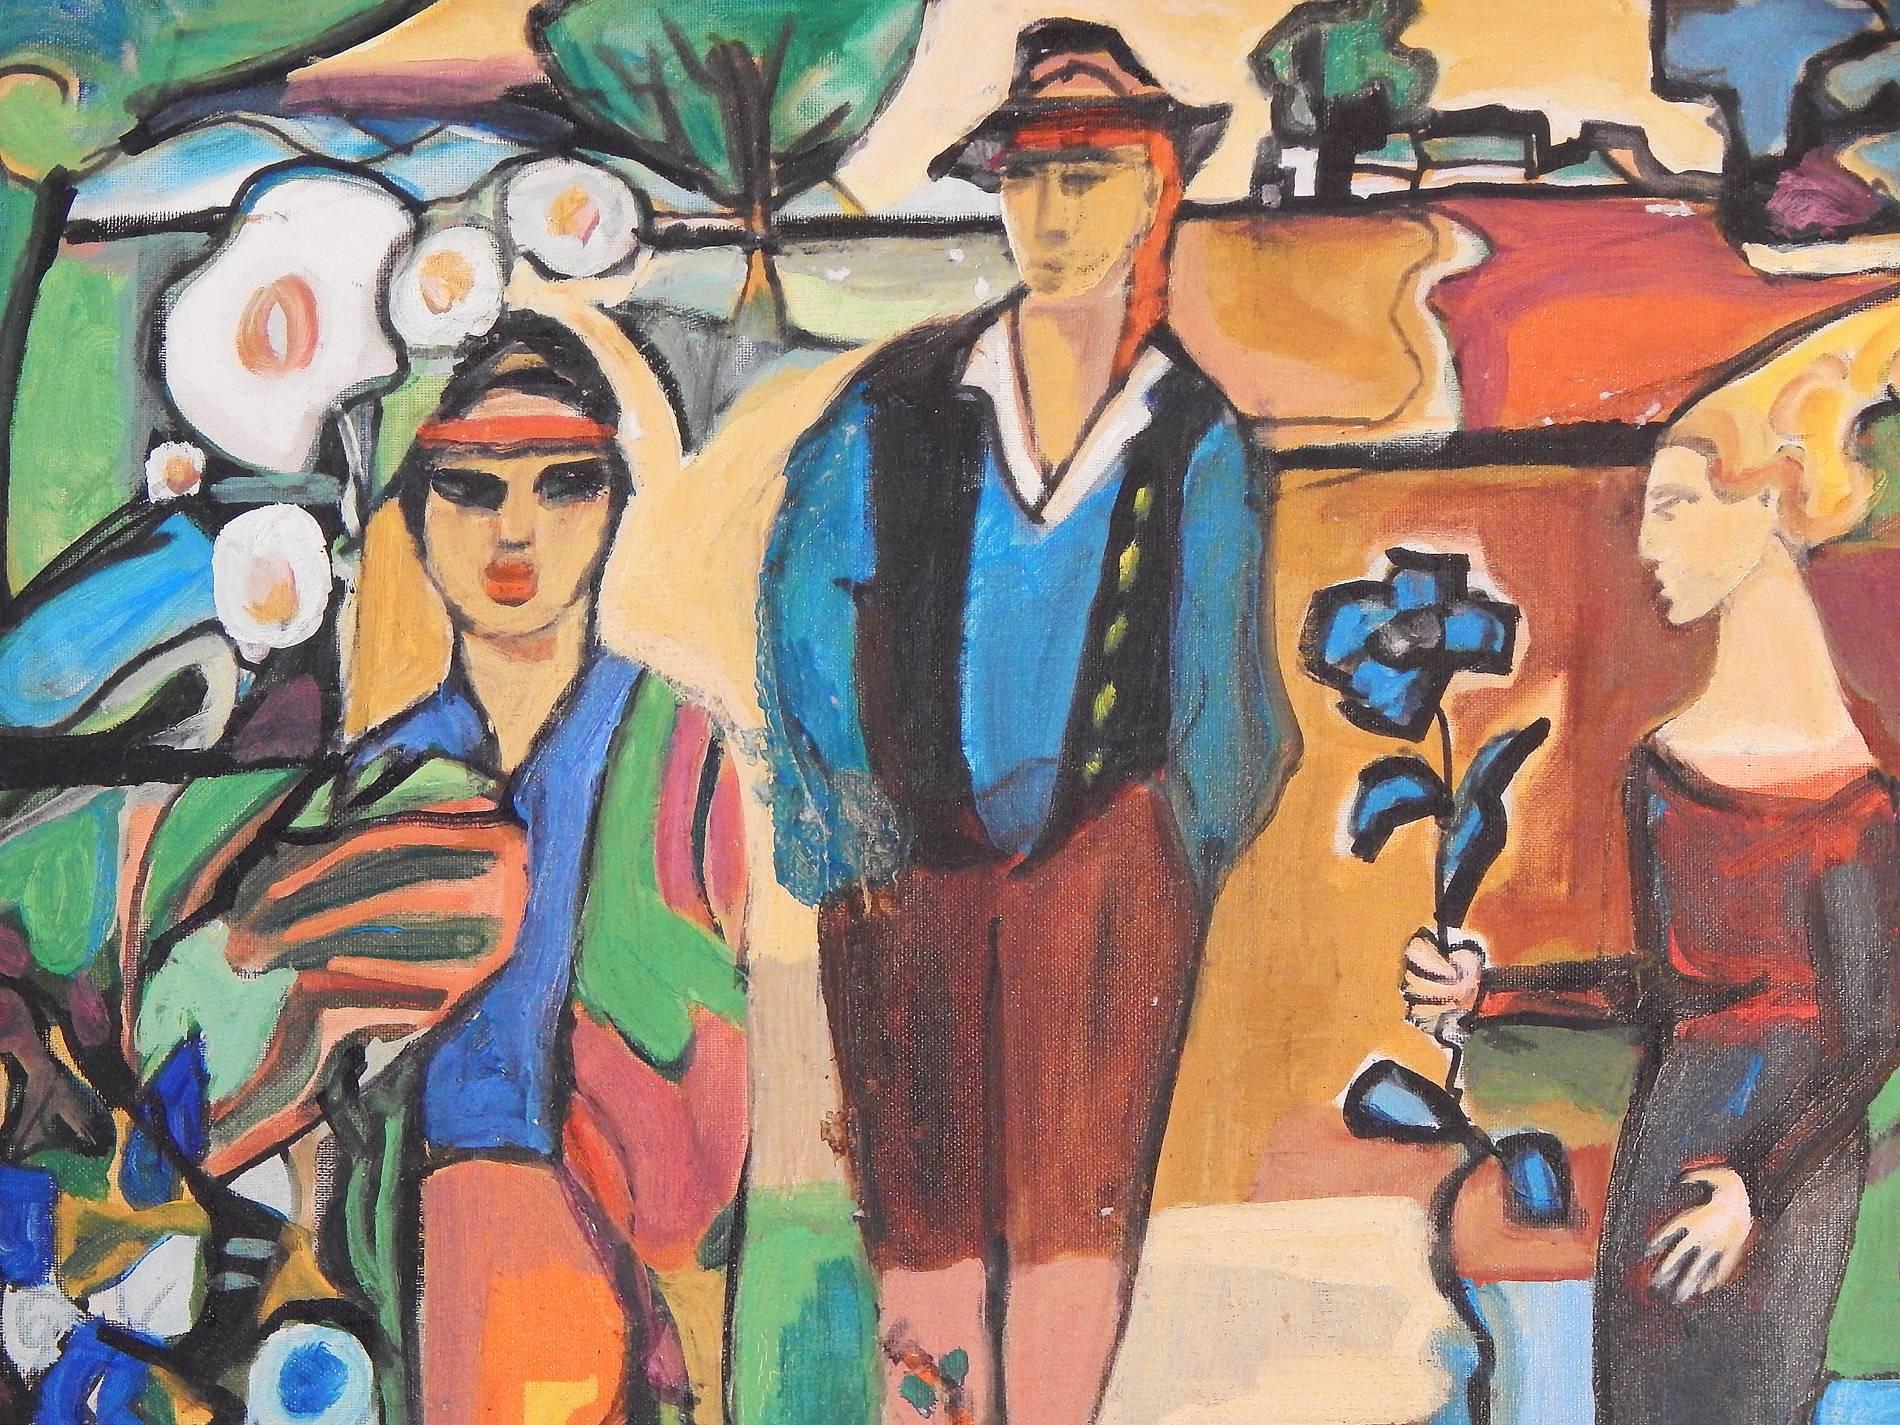 Making brilliant use of a Fauvist palette and a Secessionist vocabulary, this remarkable painting depicts three figures in the Austrian region of the Tyrol, just south of Bavaria. The central figure is garbed in traditional folk costume including